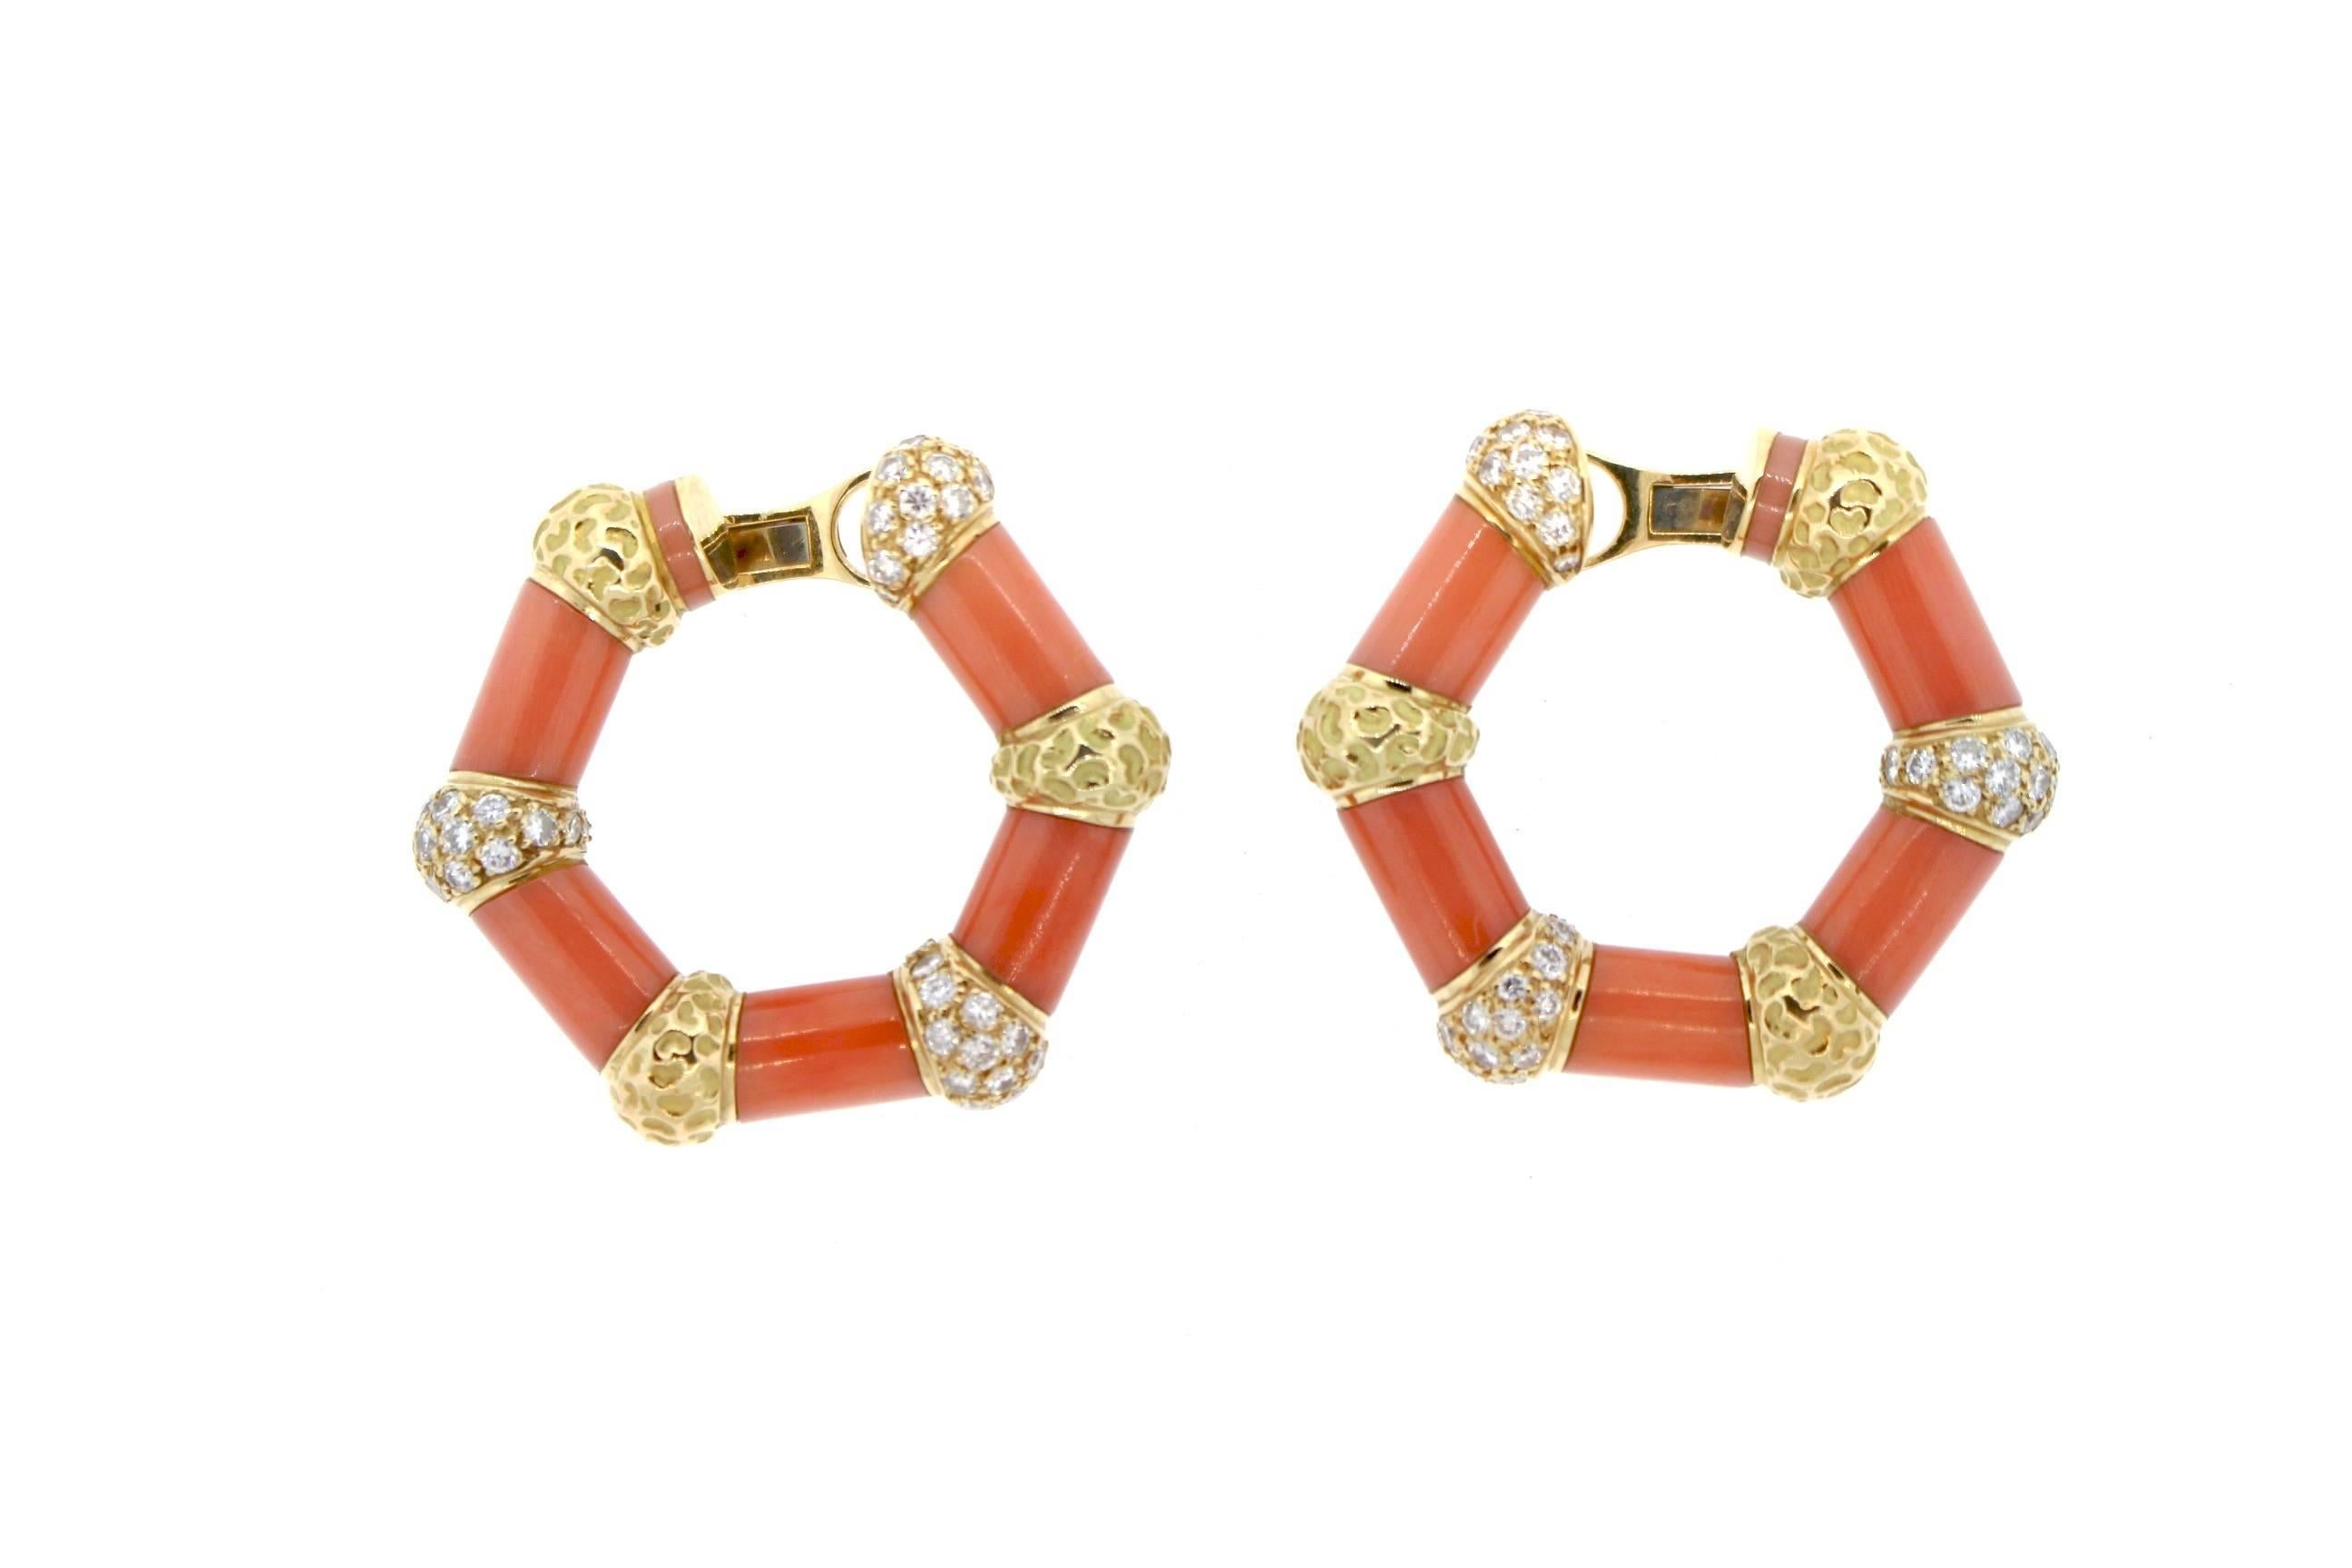 Sculptural vintage gold and diamond hoop earrings by Bulgari circa 1970.  These hoop earrings are worn close to the ear, and they have a subtle back to front design.  Six sections of coral and divided by hammered gold sections and diamond set